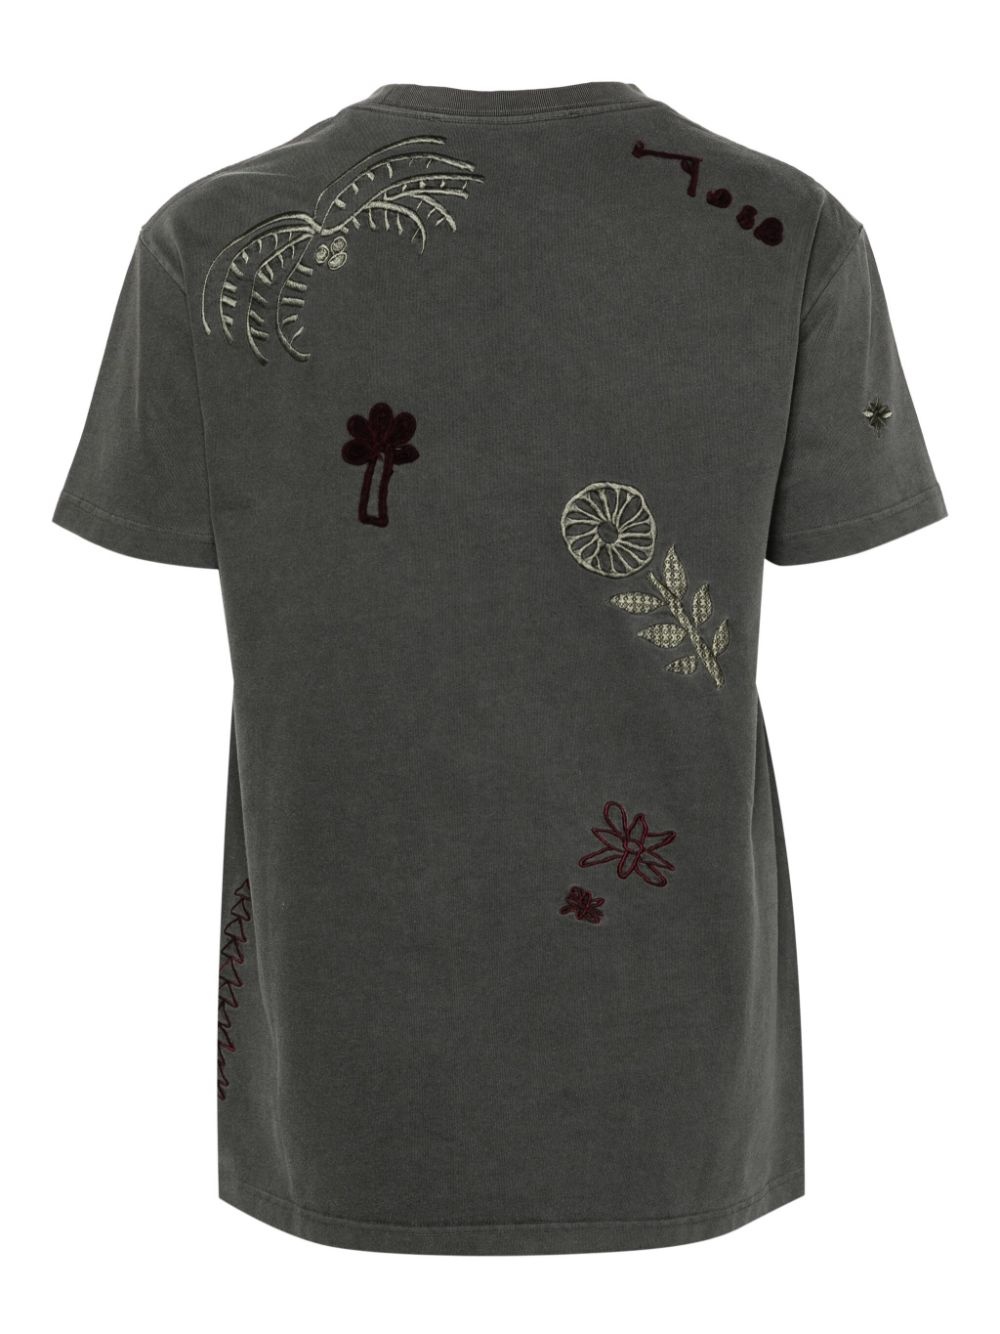 March embroidered T-shirt - 2